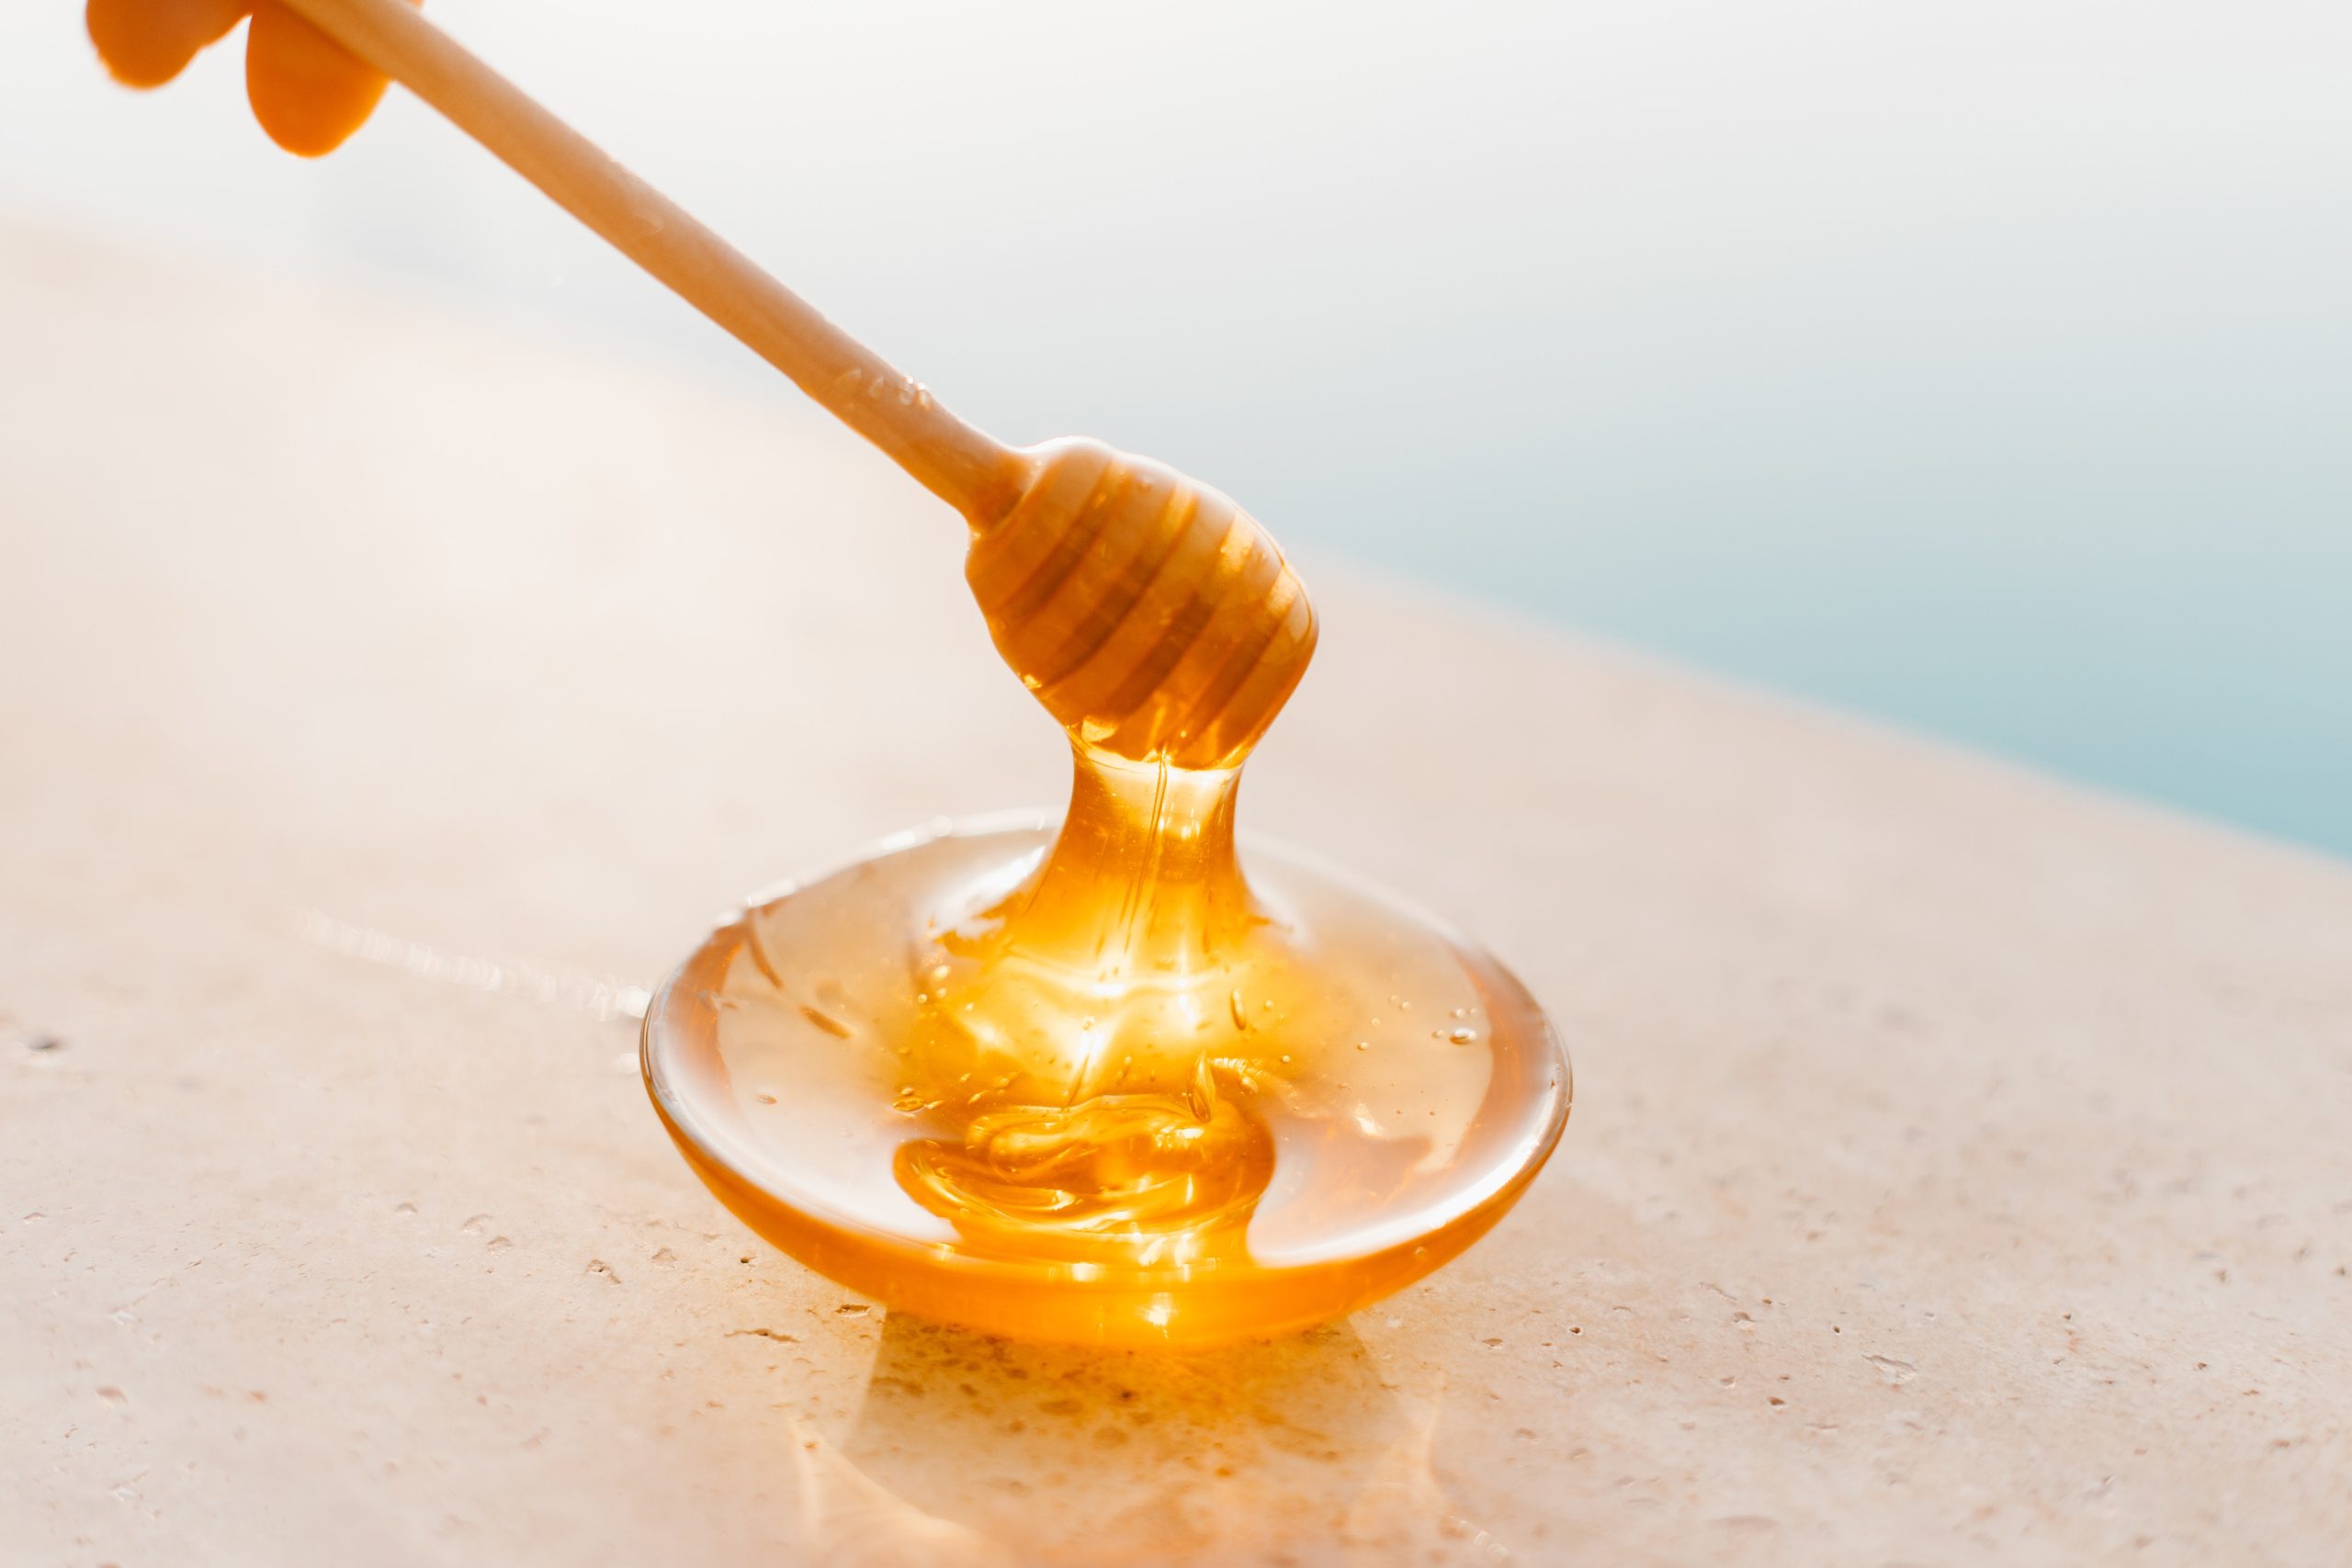 Two truths and a lie about honey